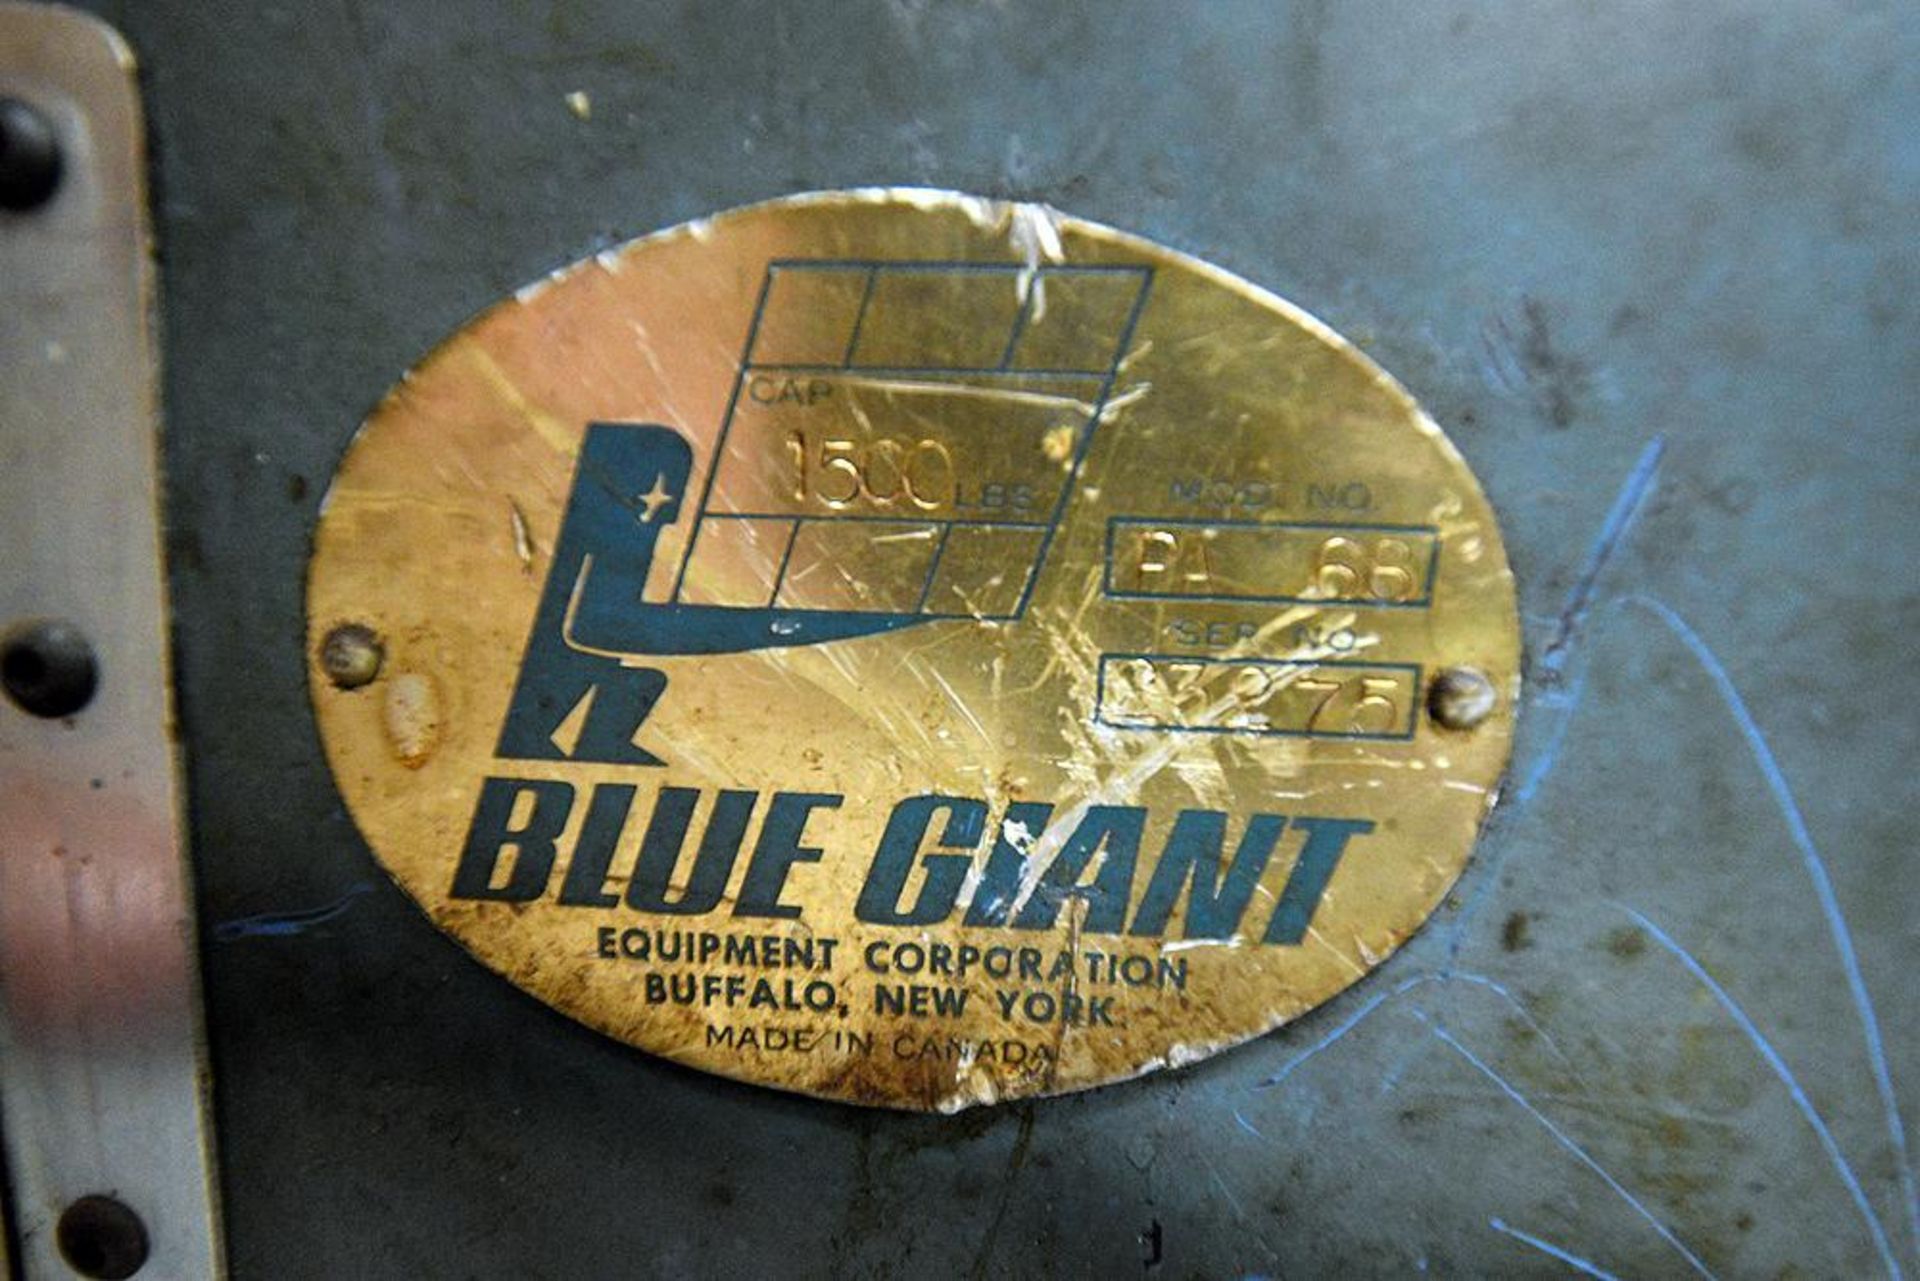 Blue Giant Electric Material Lift. Model PA 68, 1,500 lbs. Capacity - Image 5 of 5